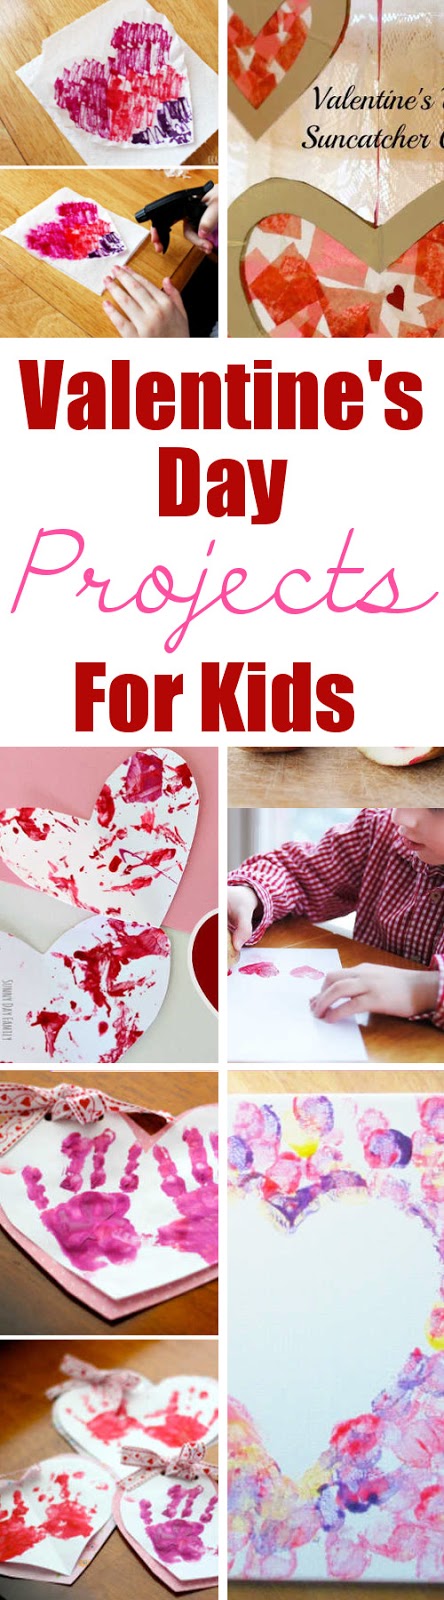 Valentine's Day Projects For Kids | DIY Home Sweet Home